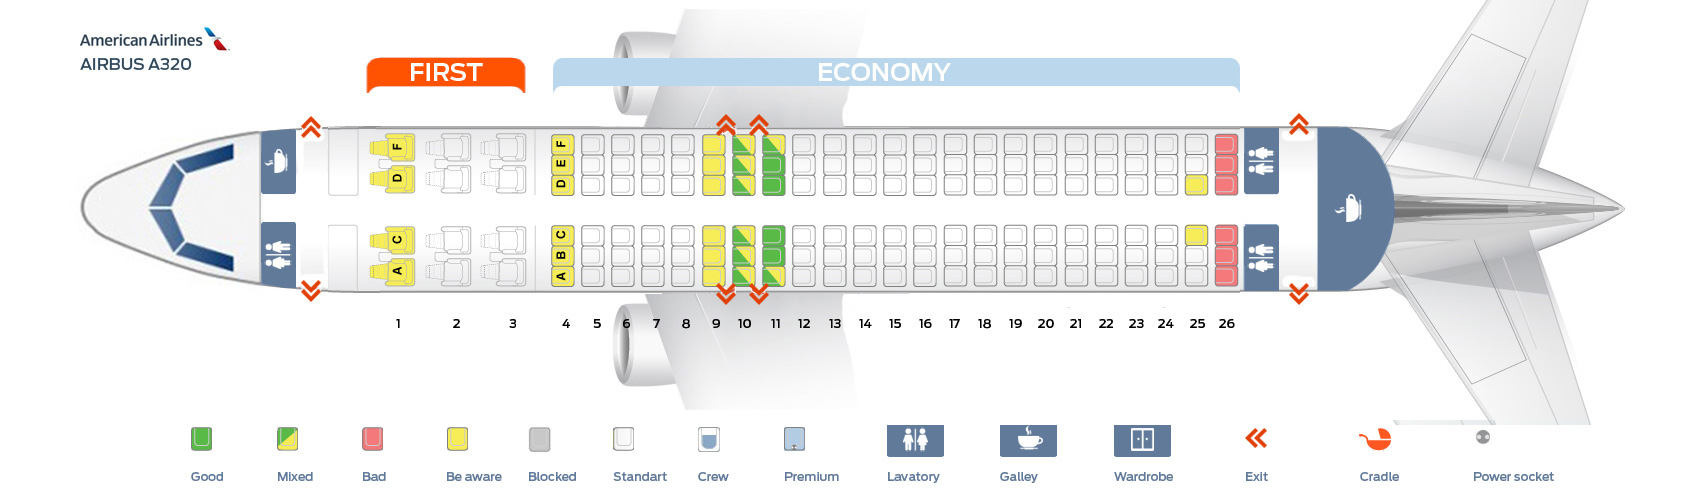 Seat Map Airbus A320 200 American Airlines Best Seats